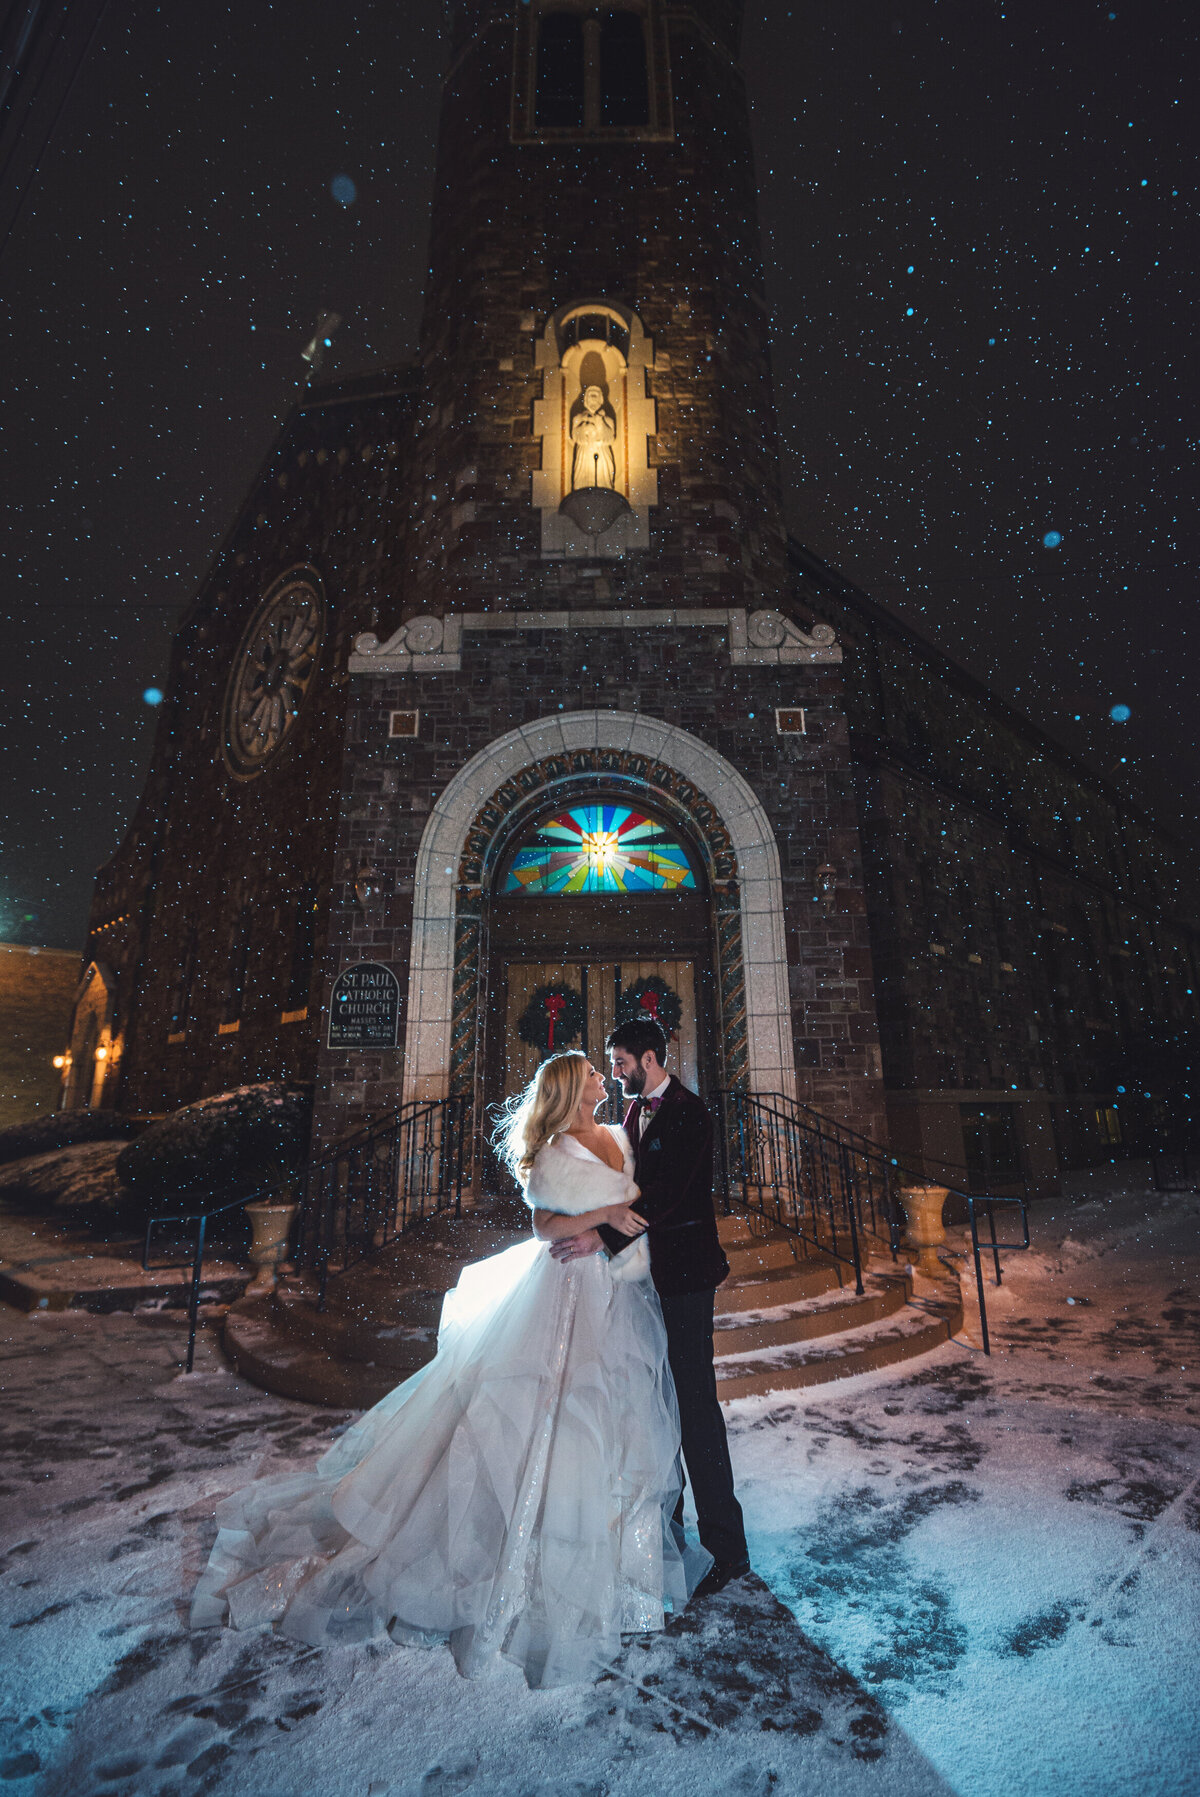 Wedding couple kissing in the snow at night.